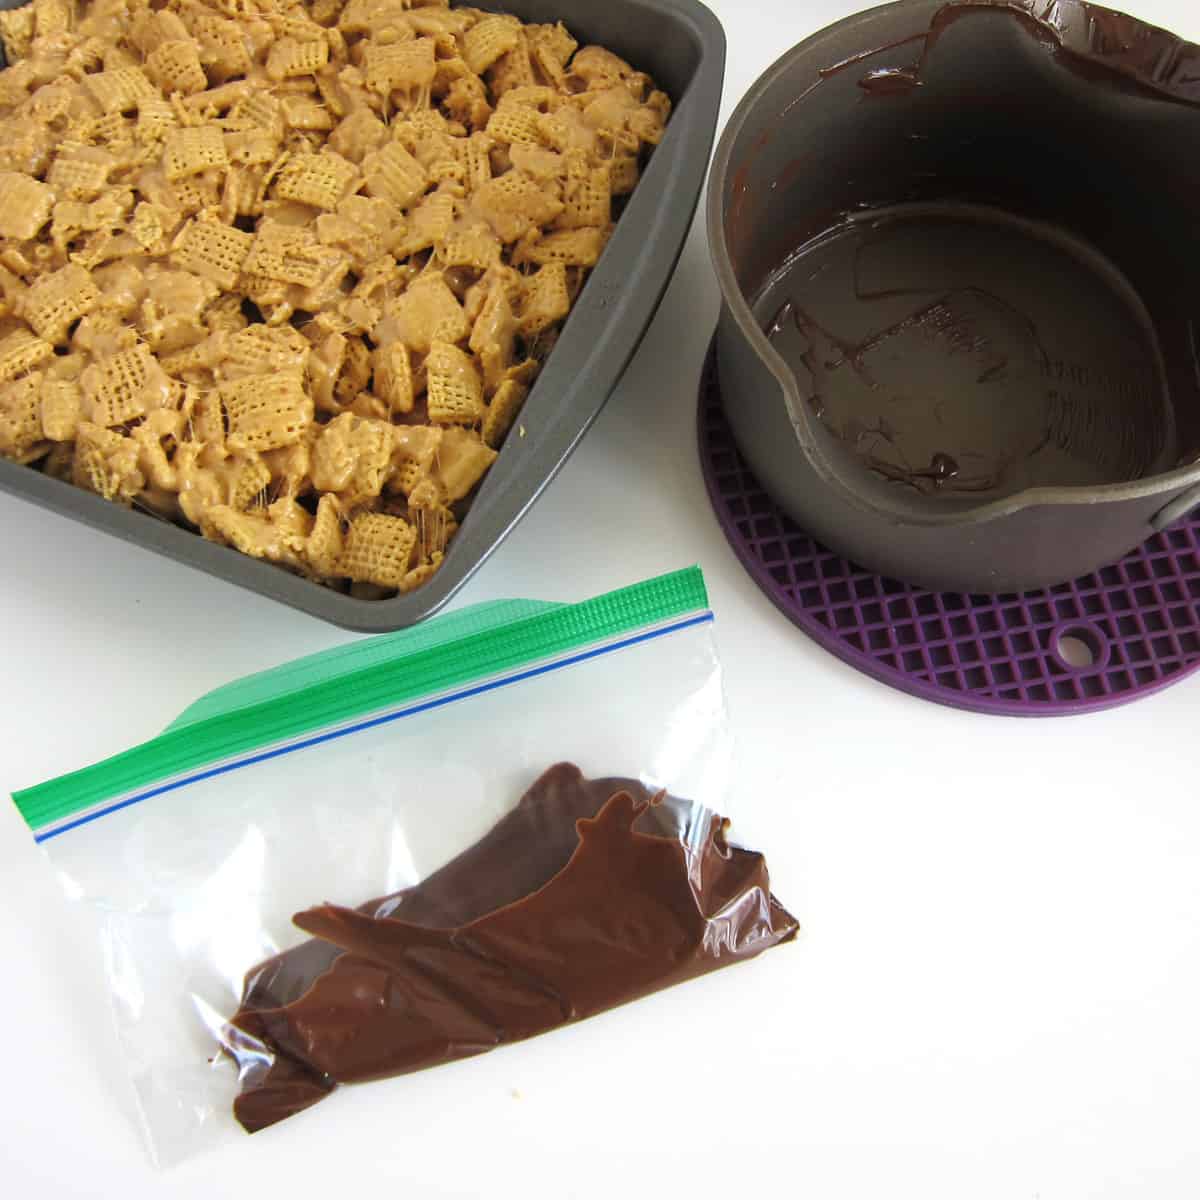 Chex Bars in pan next to an empty saucepan and a zip-top bag filled with melted chocolate and peanut butter